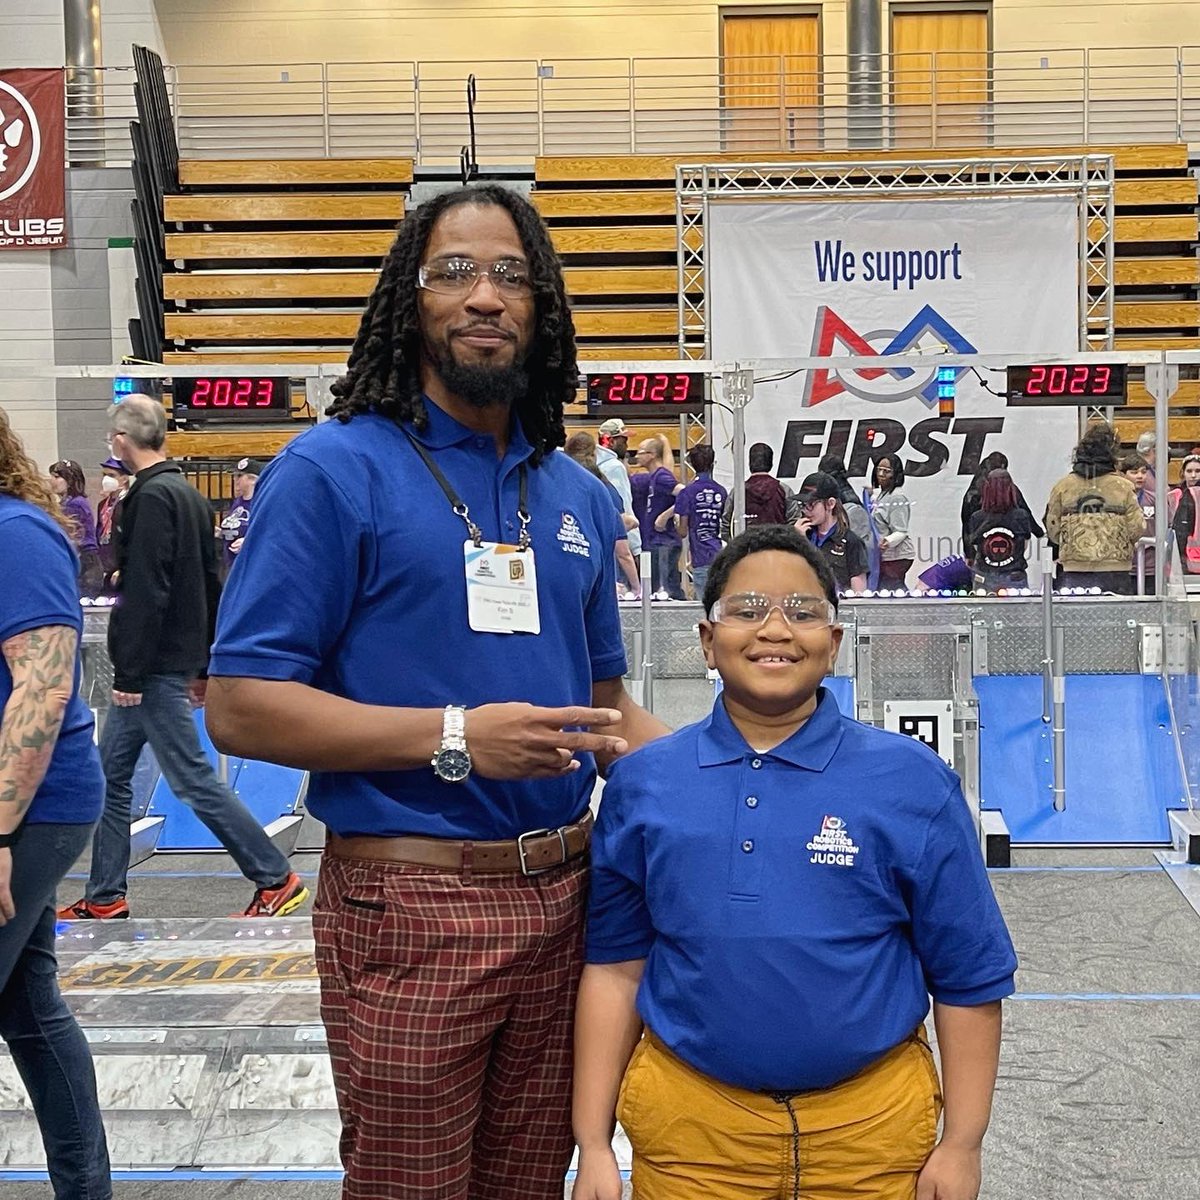 The future is bright and beautiful thanks to the young students of Michigan and their mentors. Gotta love seeing the number of participants grow each year 💪🏾 especially from the Detroit area.

#chargedup
#omgrobots 
#firstrobotics
#firstenergize